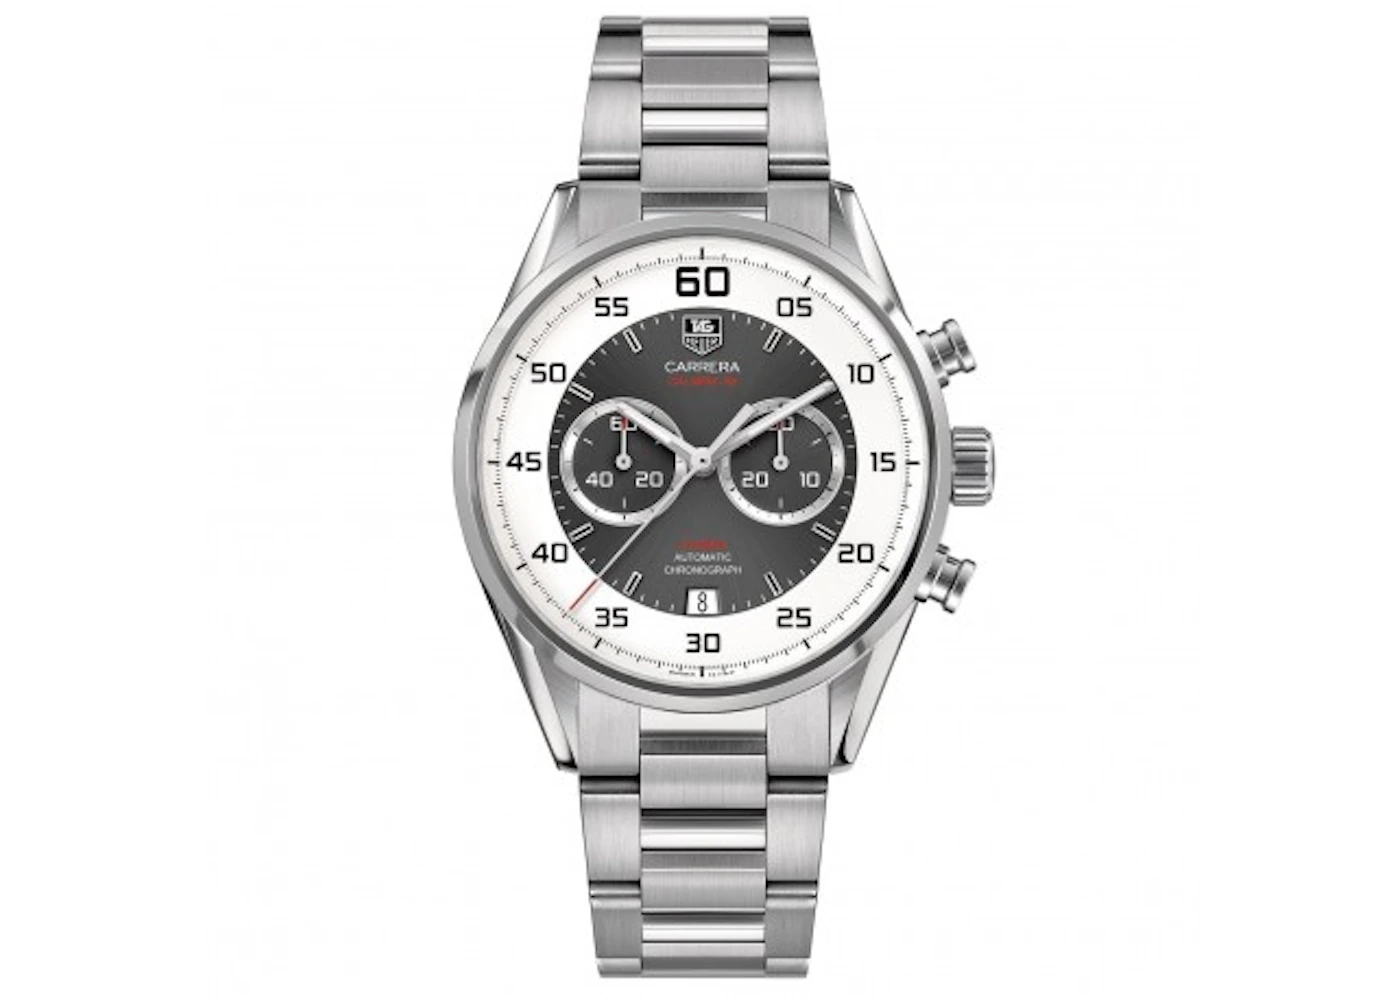 Tag Heuer Carrera CAR2B11.BA0799 43mm in Stainless Steel - US